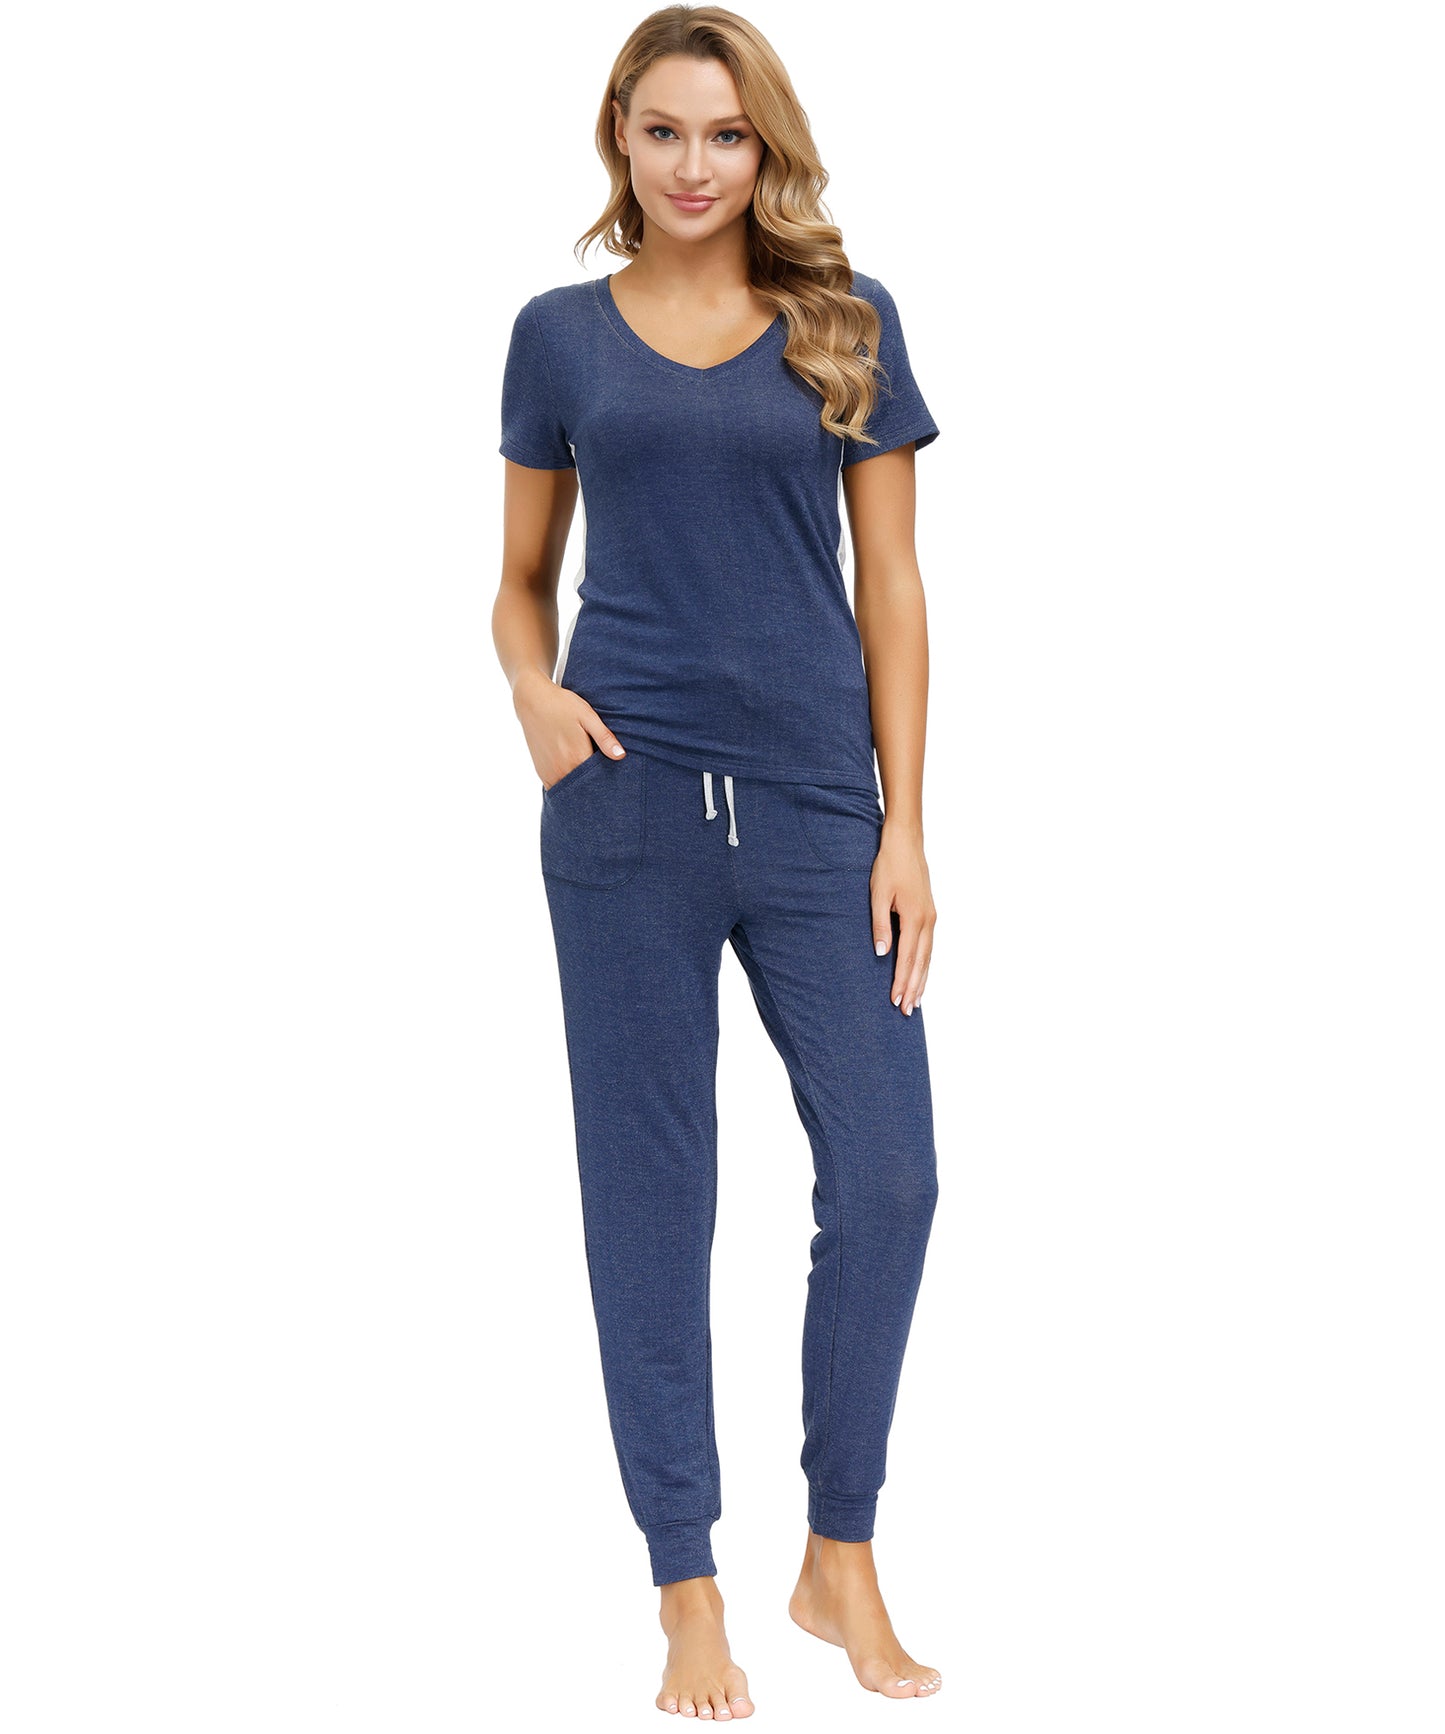 Navy French Terry Jogger Set in color Navy